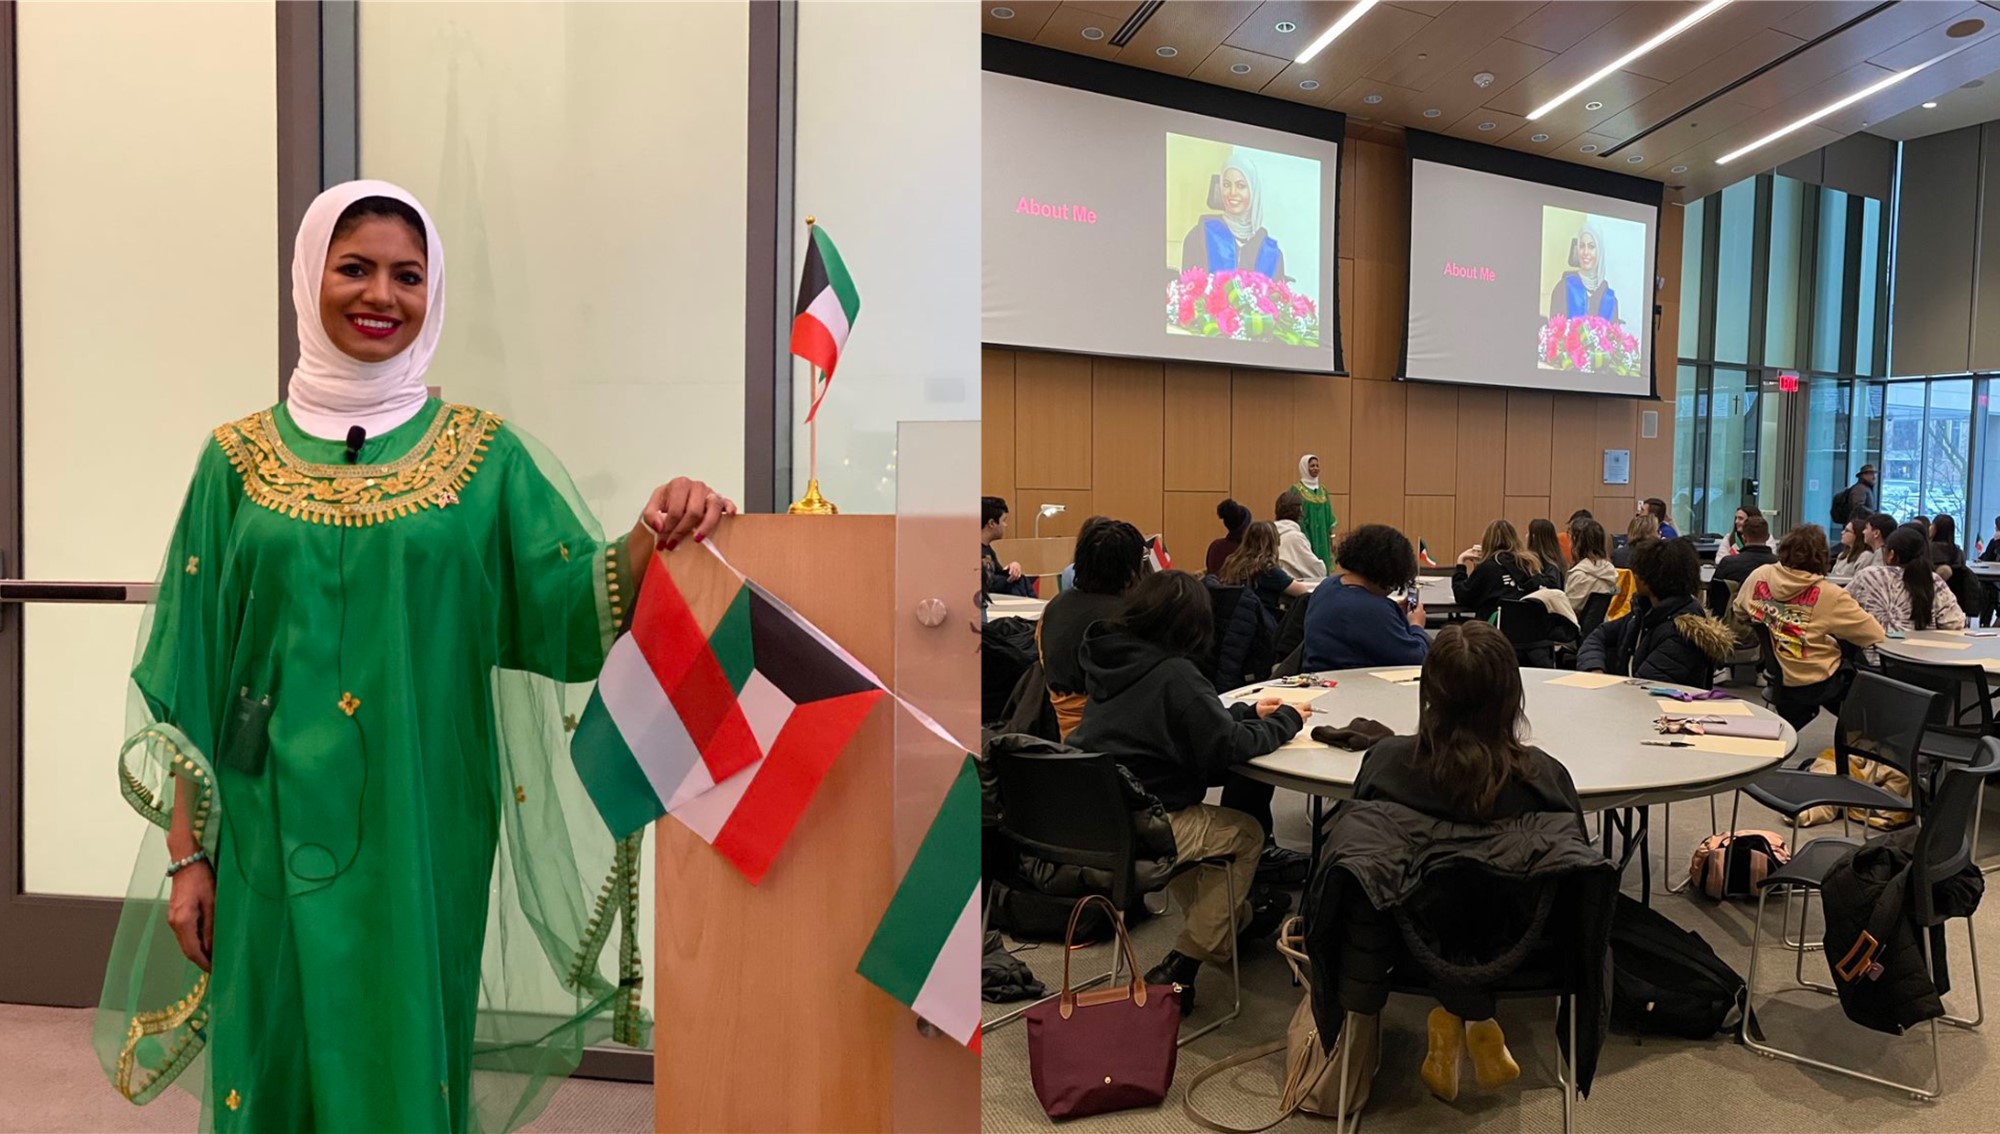 Left half of image features a woman displaying flags of Kuwait. Right half of the image features a crowded room with the woman at a podium with large screens behind her